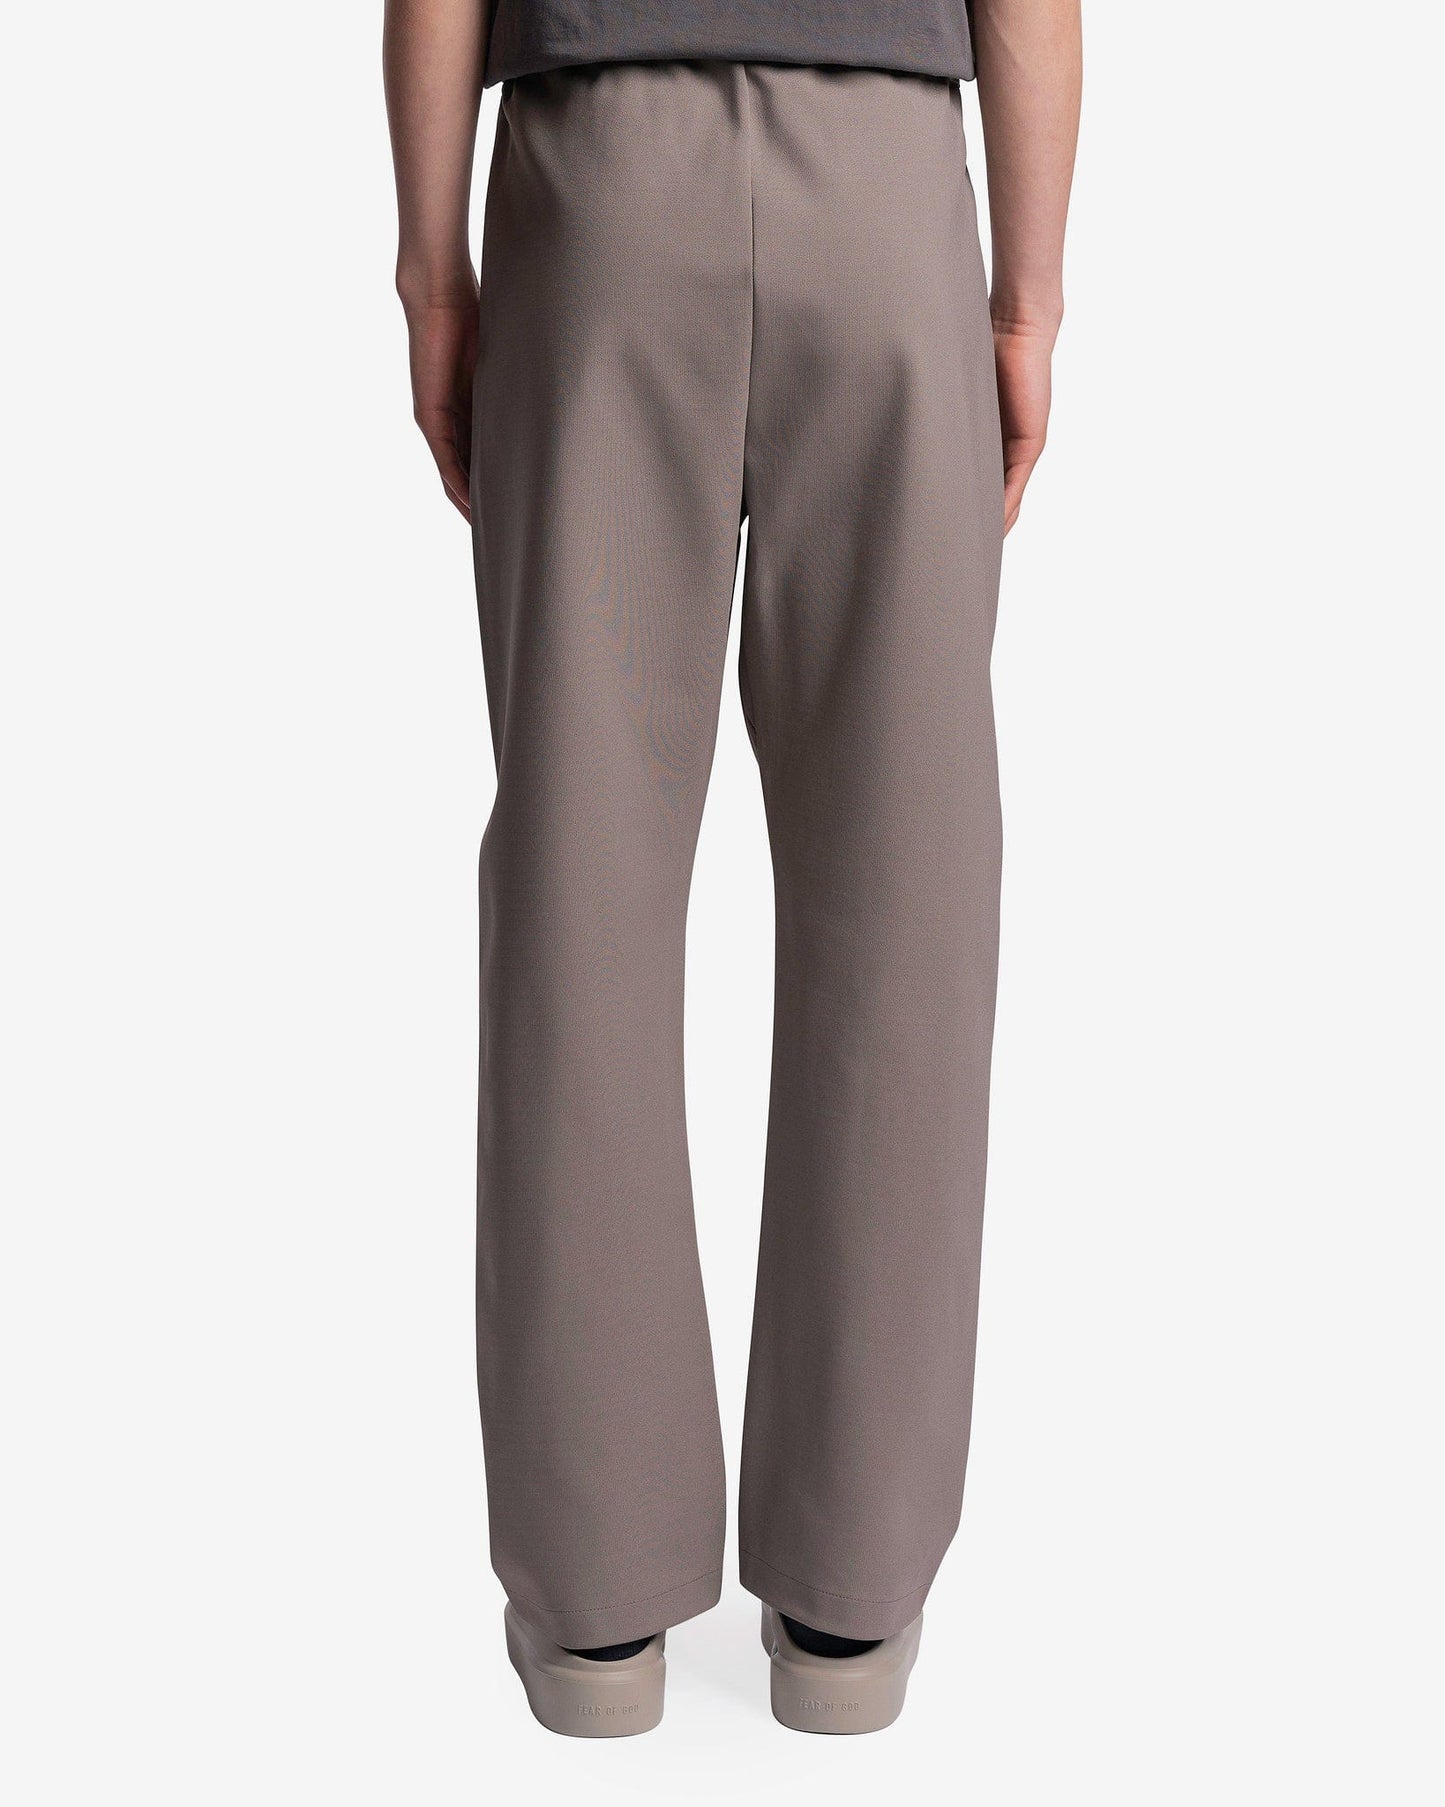 Fear of God Men's Pants Eternal Viscose Tricot Relaxed Pants in Dusty Concrete